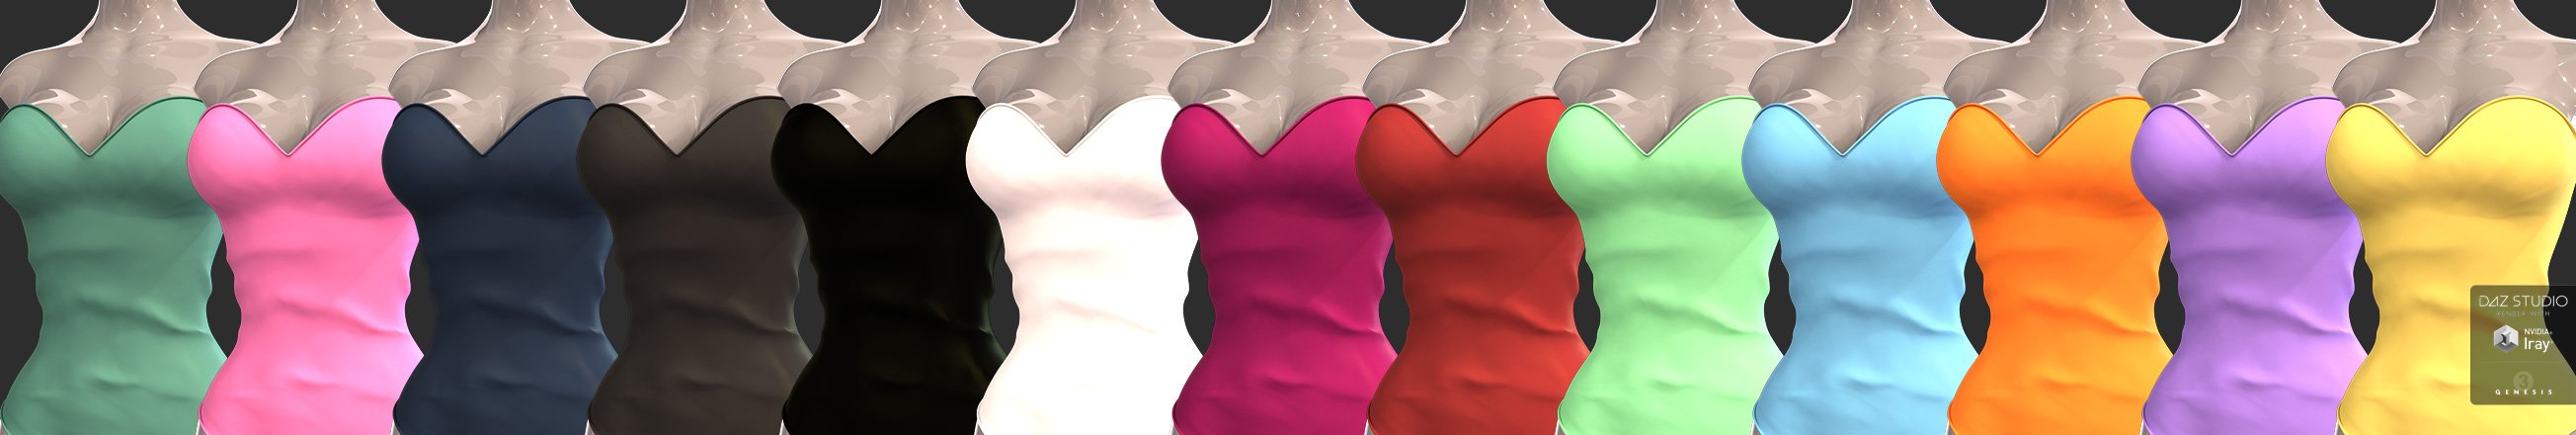 i13 Swim Duo Bikini and One Piece for the Genesis 3 Female(s) by: ironman13, 3D Models by Daz 3D